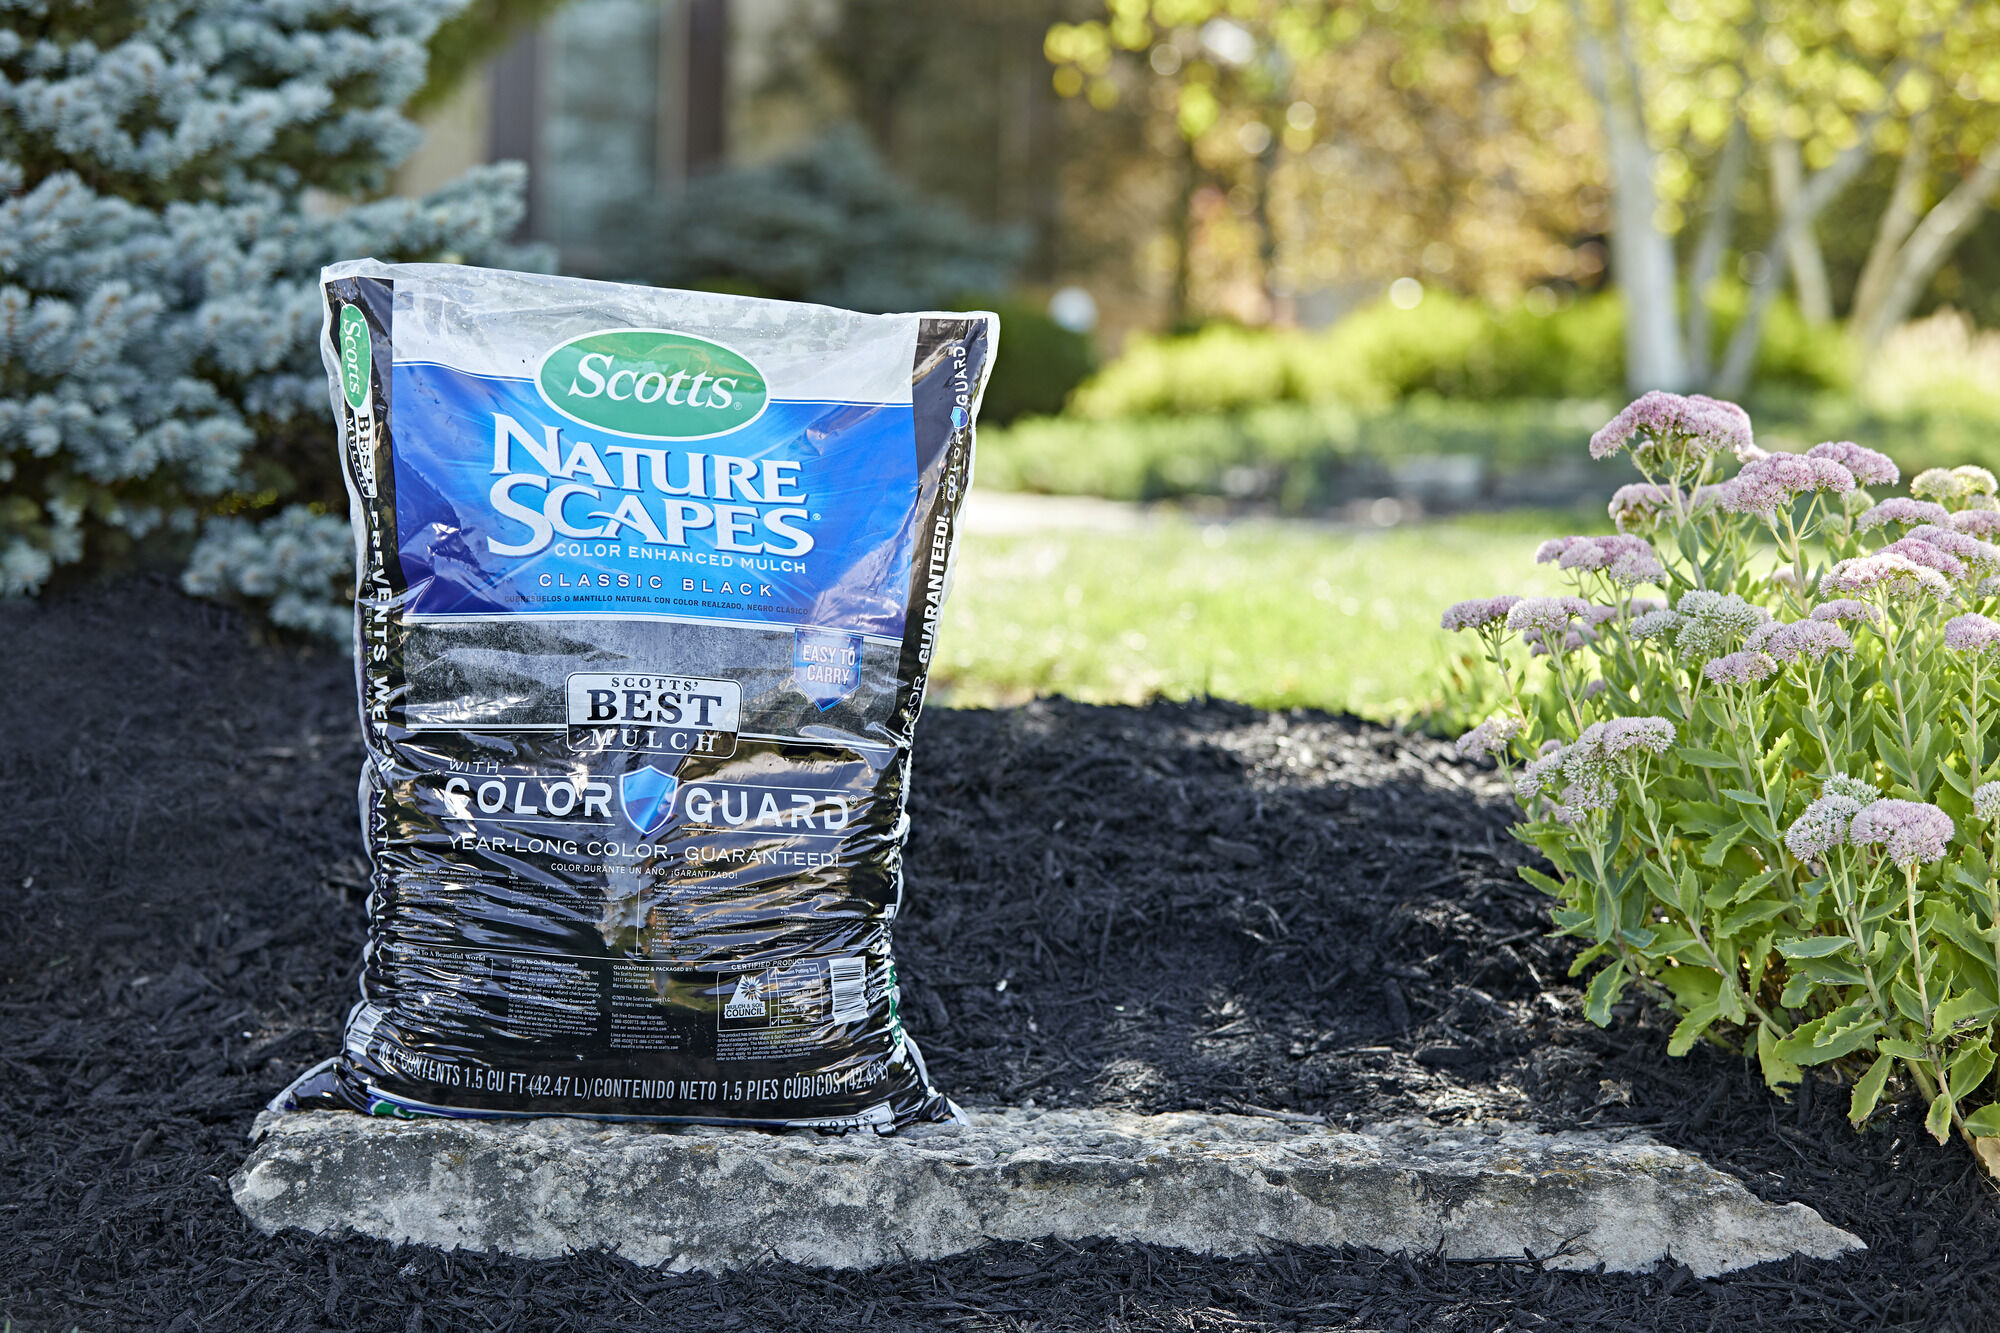 Image of Scotts Nature Scapes mulch bags